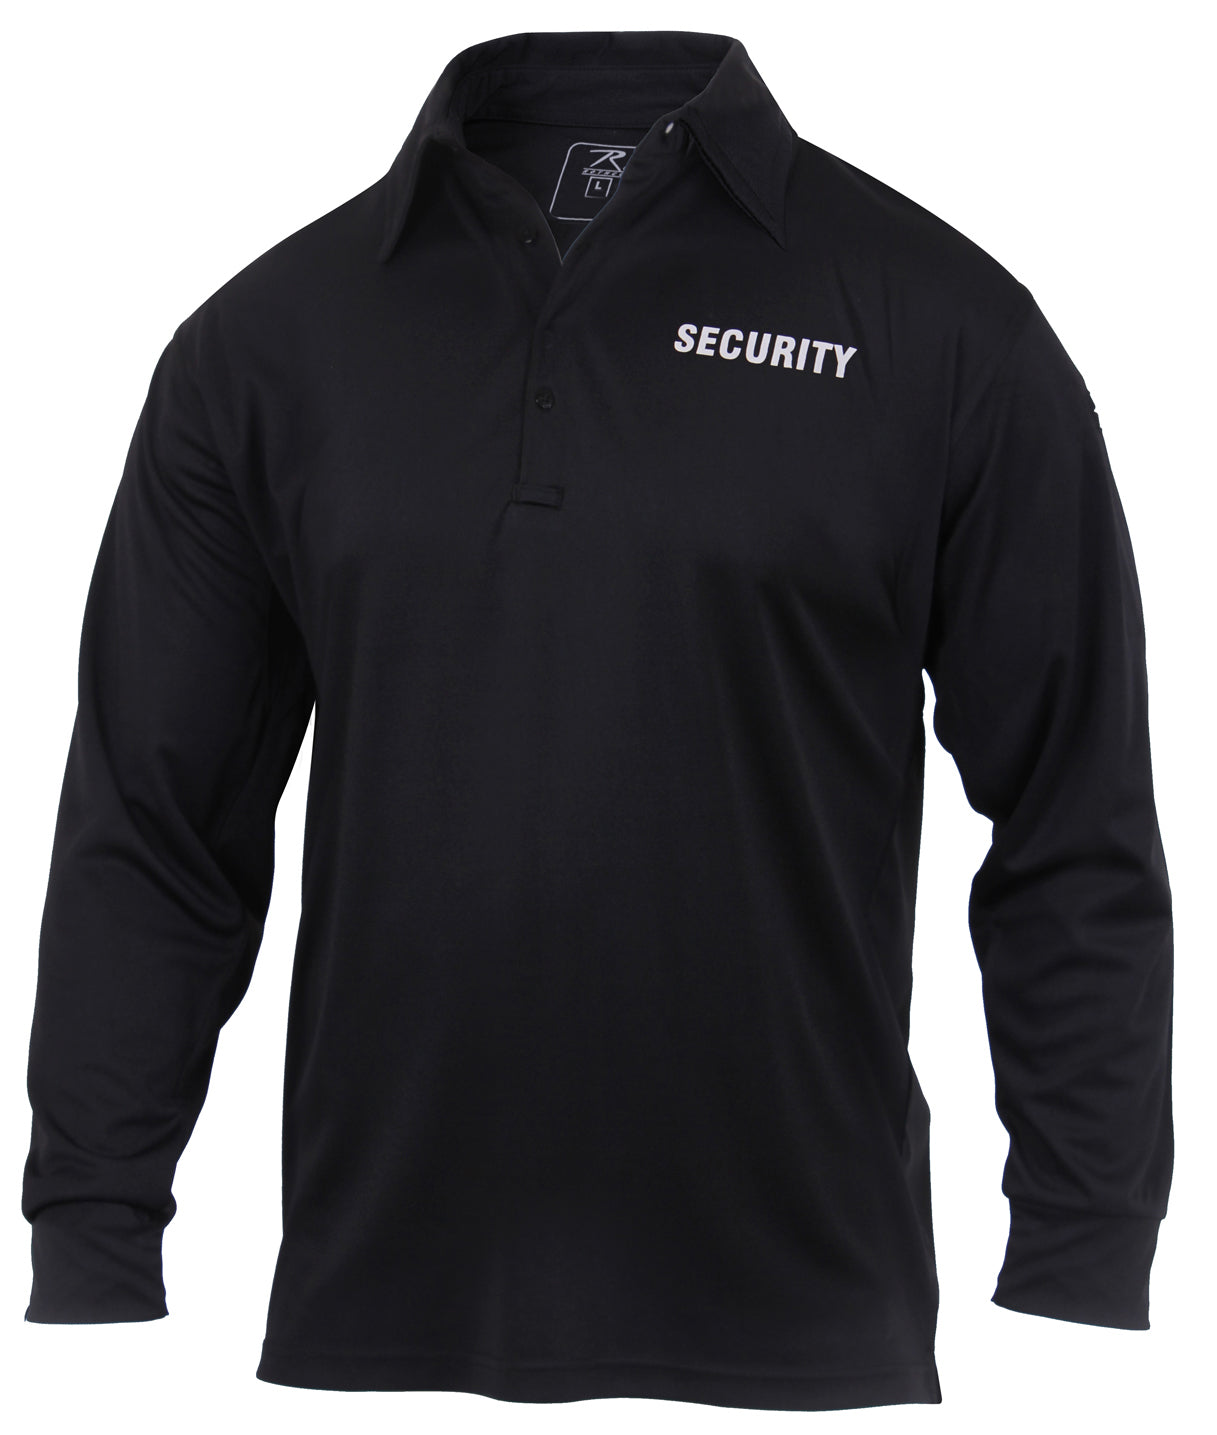 Rothco Moisture Wicking Long Sleeve Security Polo - Men's Black Collared Shirt